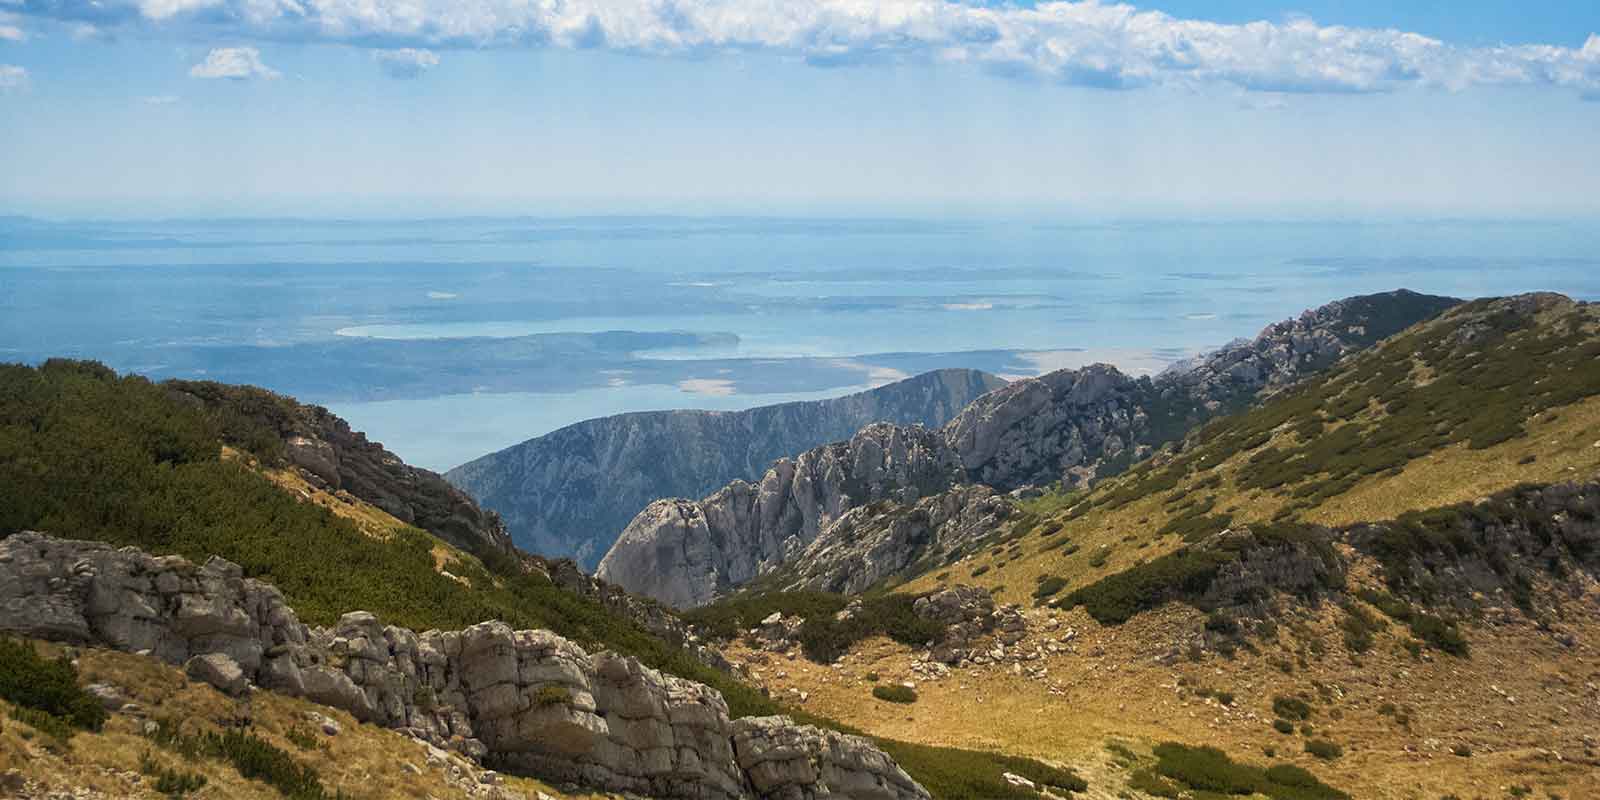 View from Velebit Mountains looking out to sea